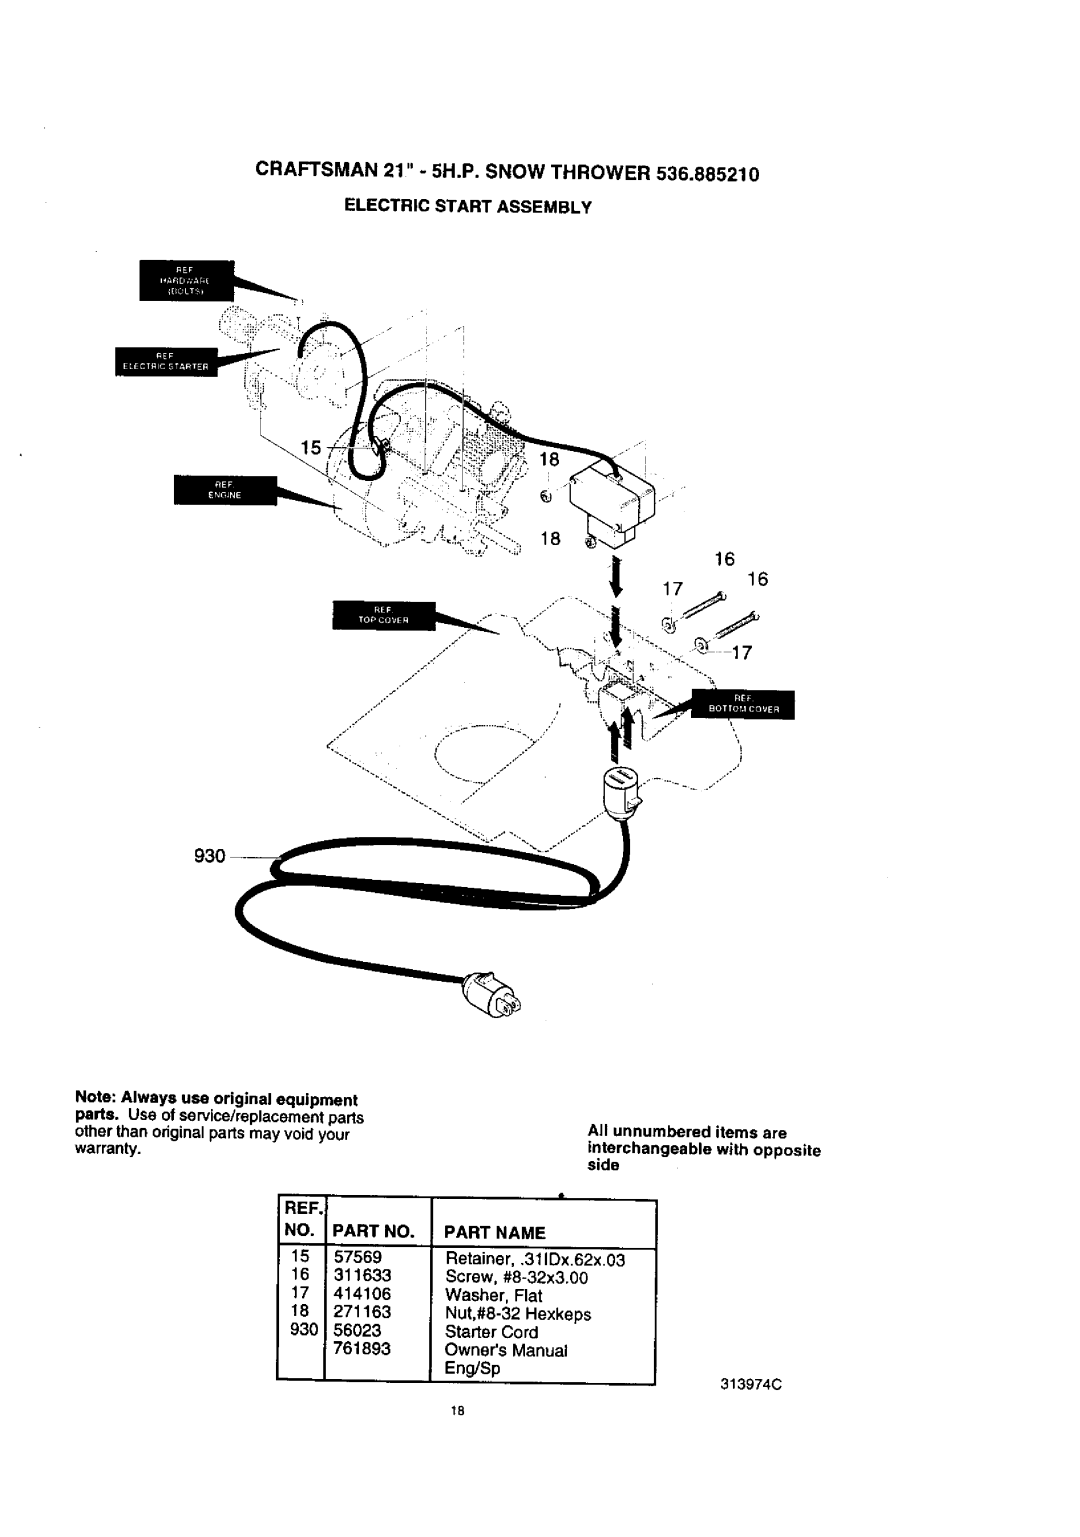 Craftsman 536.88521 operating instructions Craftsman 21 5H.P. Snow Thrower, Electric Start Assembly, Part Name 